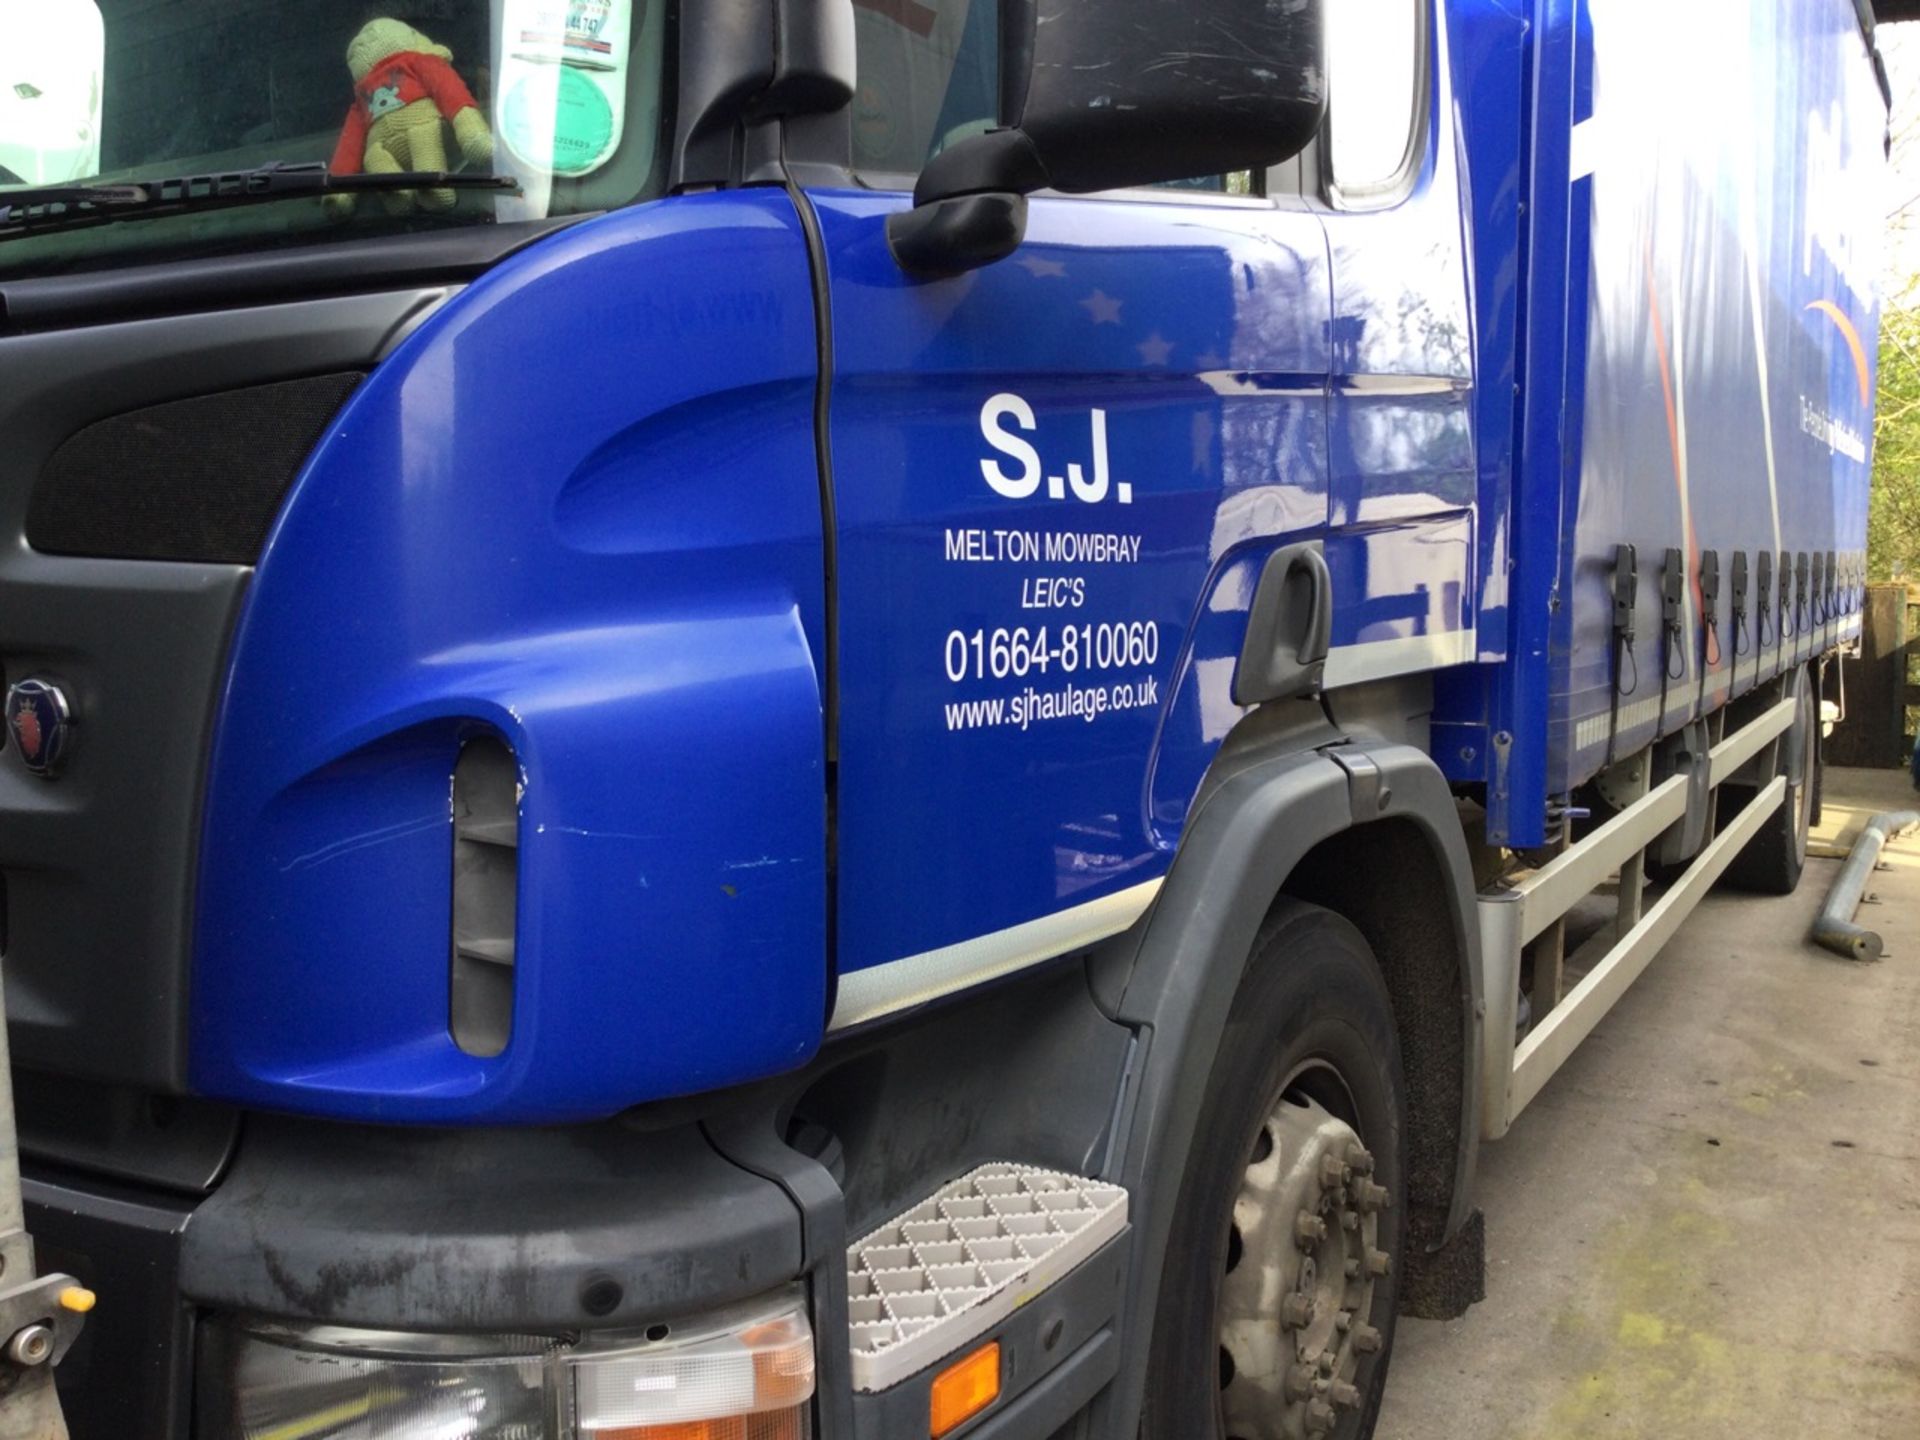 SCANIA 4x2 18t Rigid Curtainside With Dhollandia Tail Lift, Registration number SJI6629 , year 2007 - Image 2 of 3